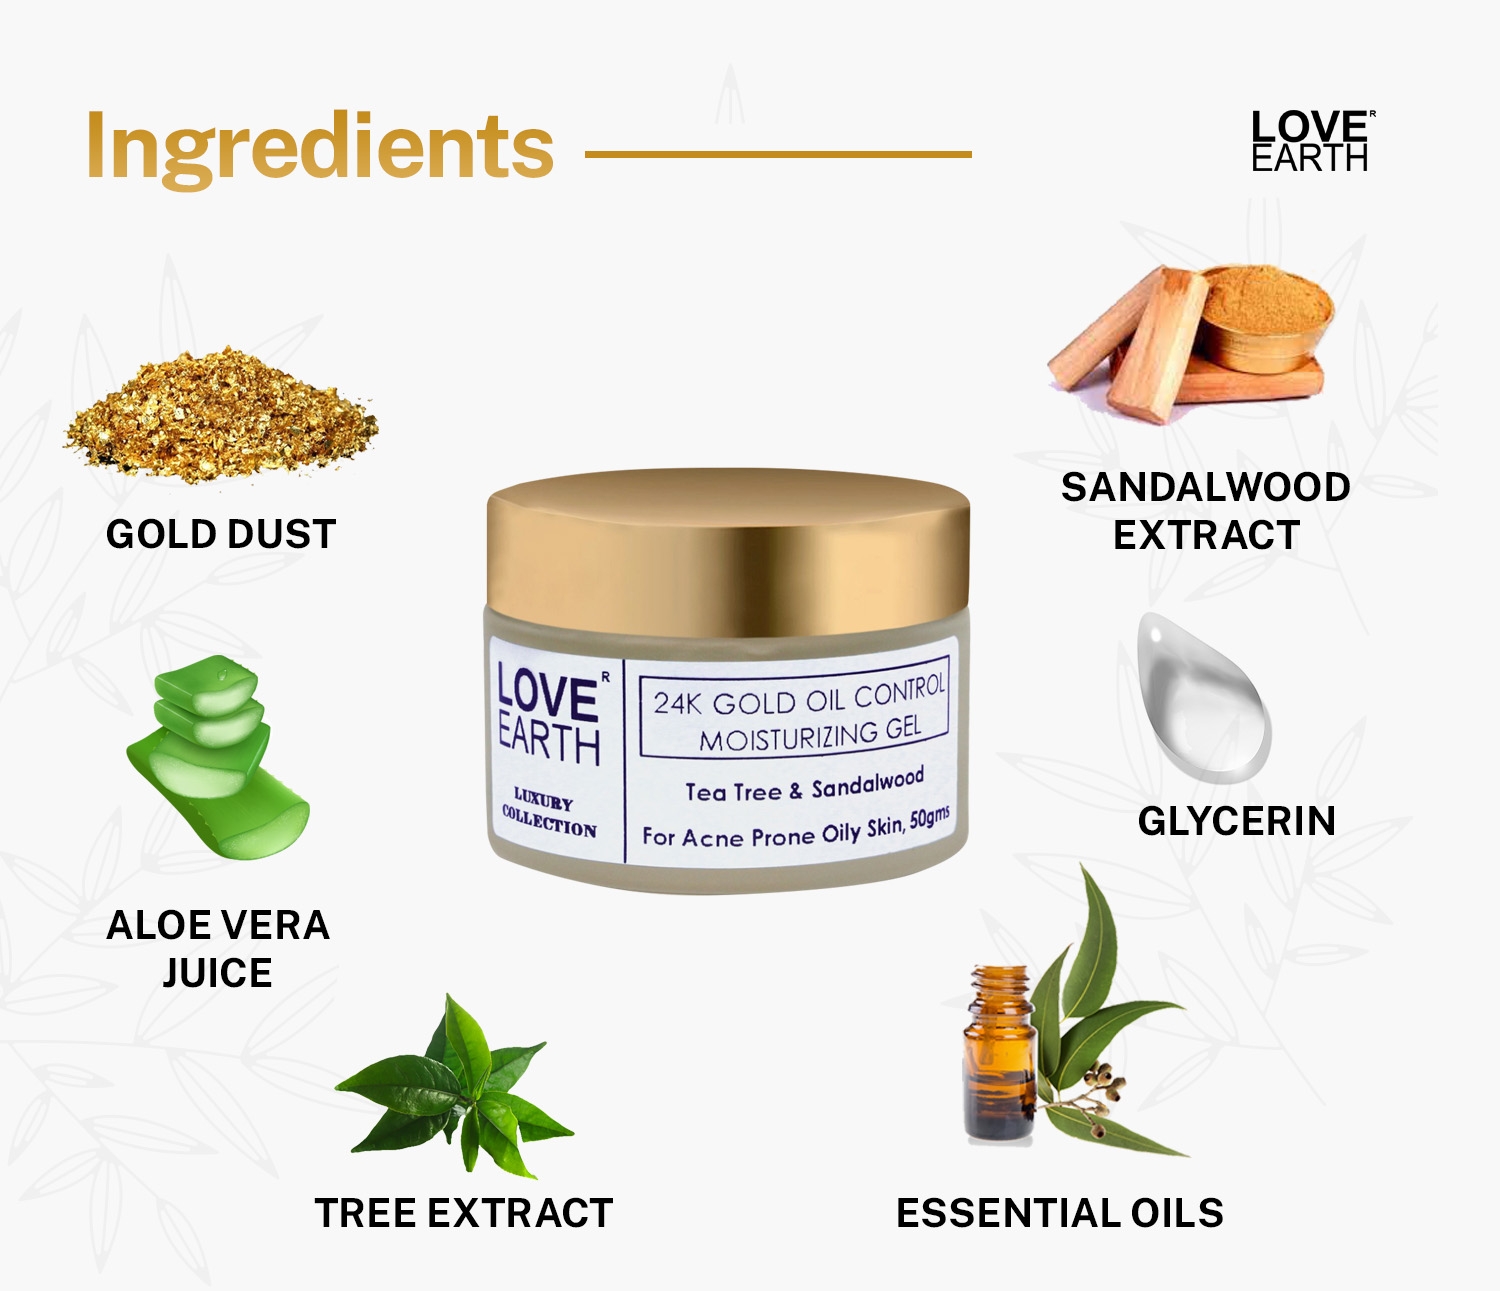 LOVE EARTH | Love Earth 24K Gold Oil Control Moisturizing Gel With Aloe Vera & Sandalwood Extract For Sensitive & Acne-Prone Skin Suitable For All Skin Types 50gm 2